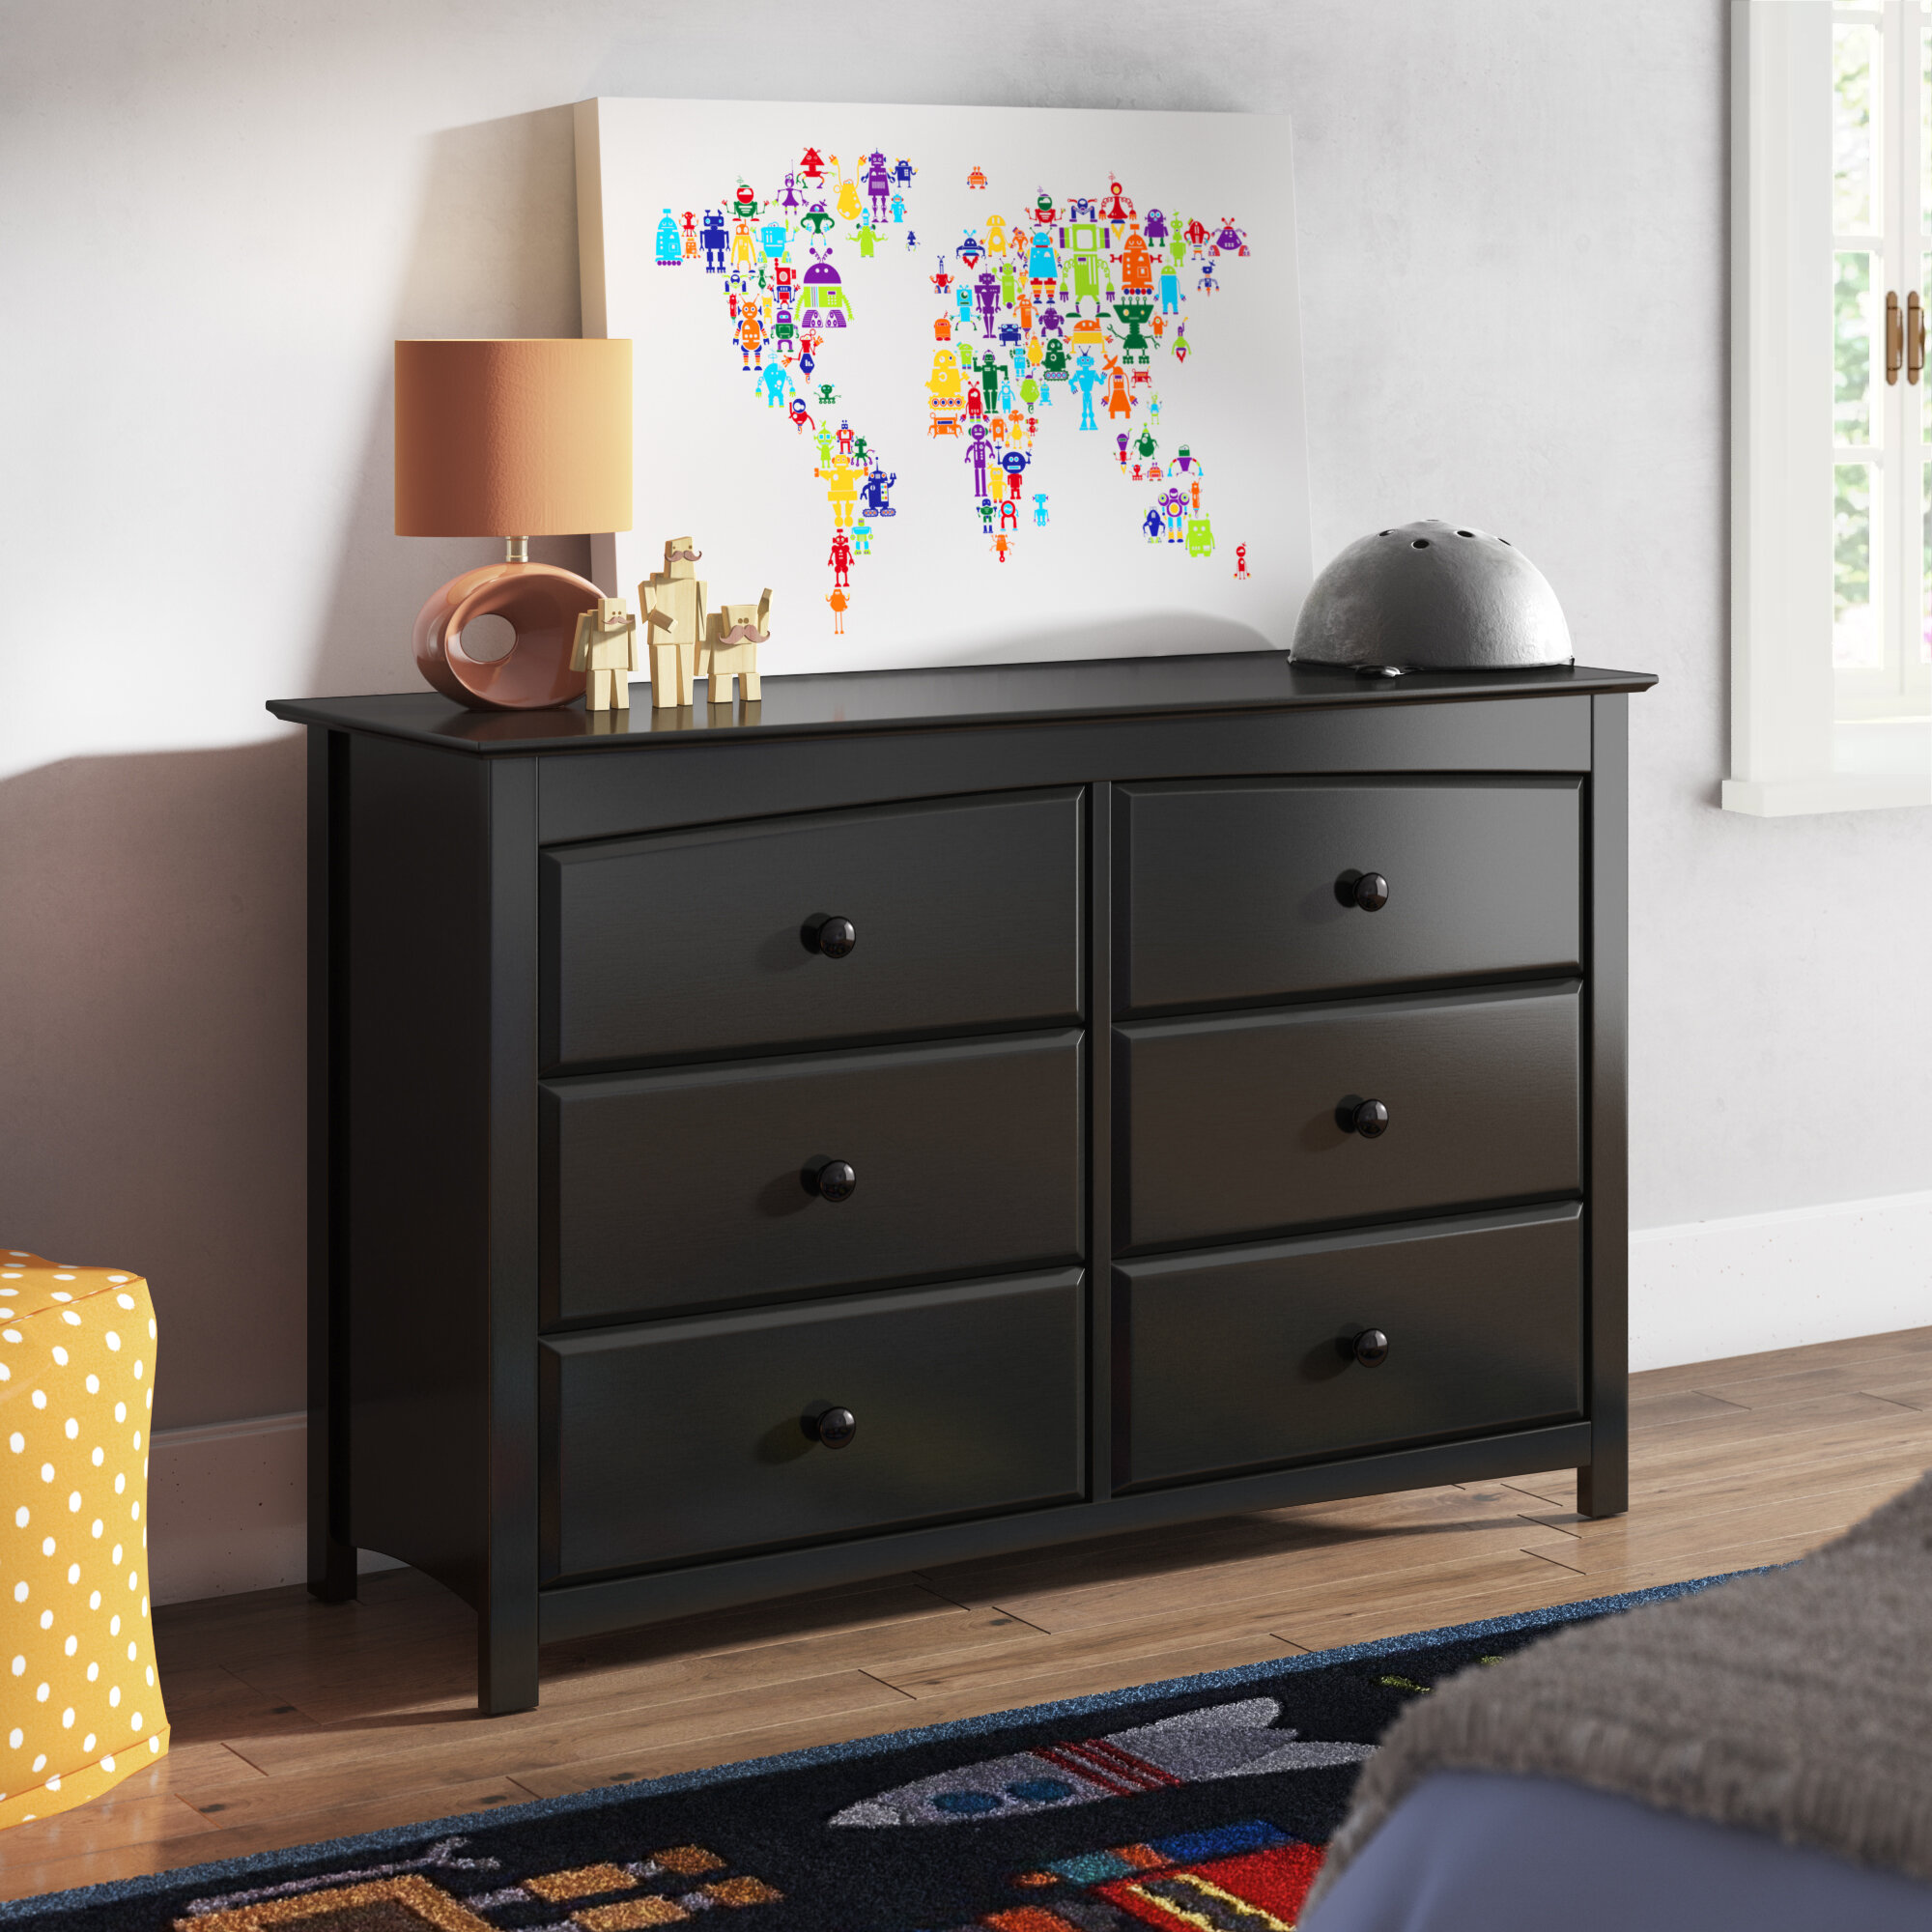 Changing Dressing Chests Dressers Ideal For Nursery Cherry